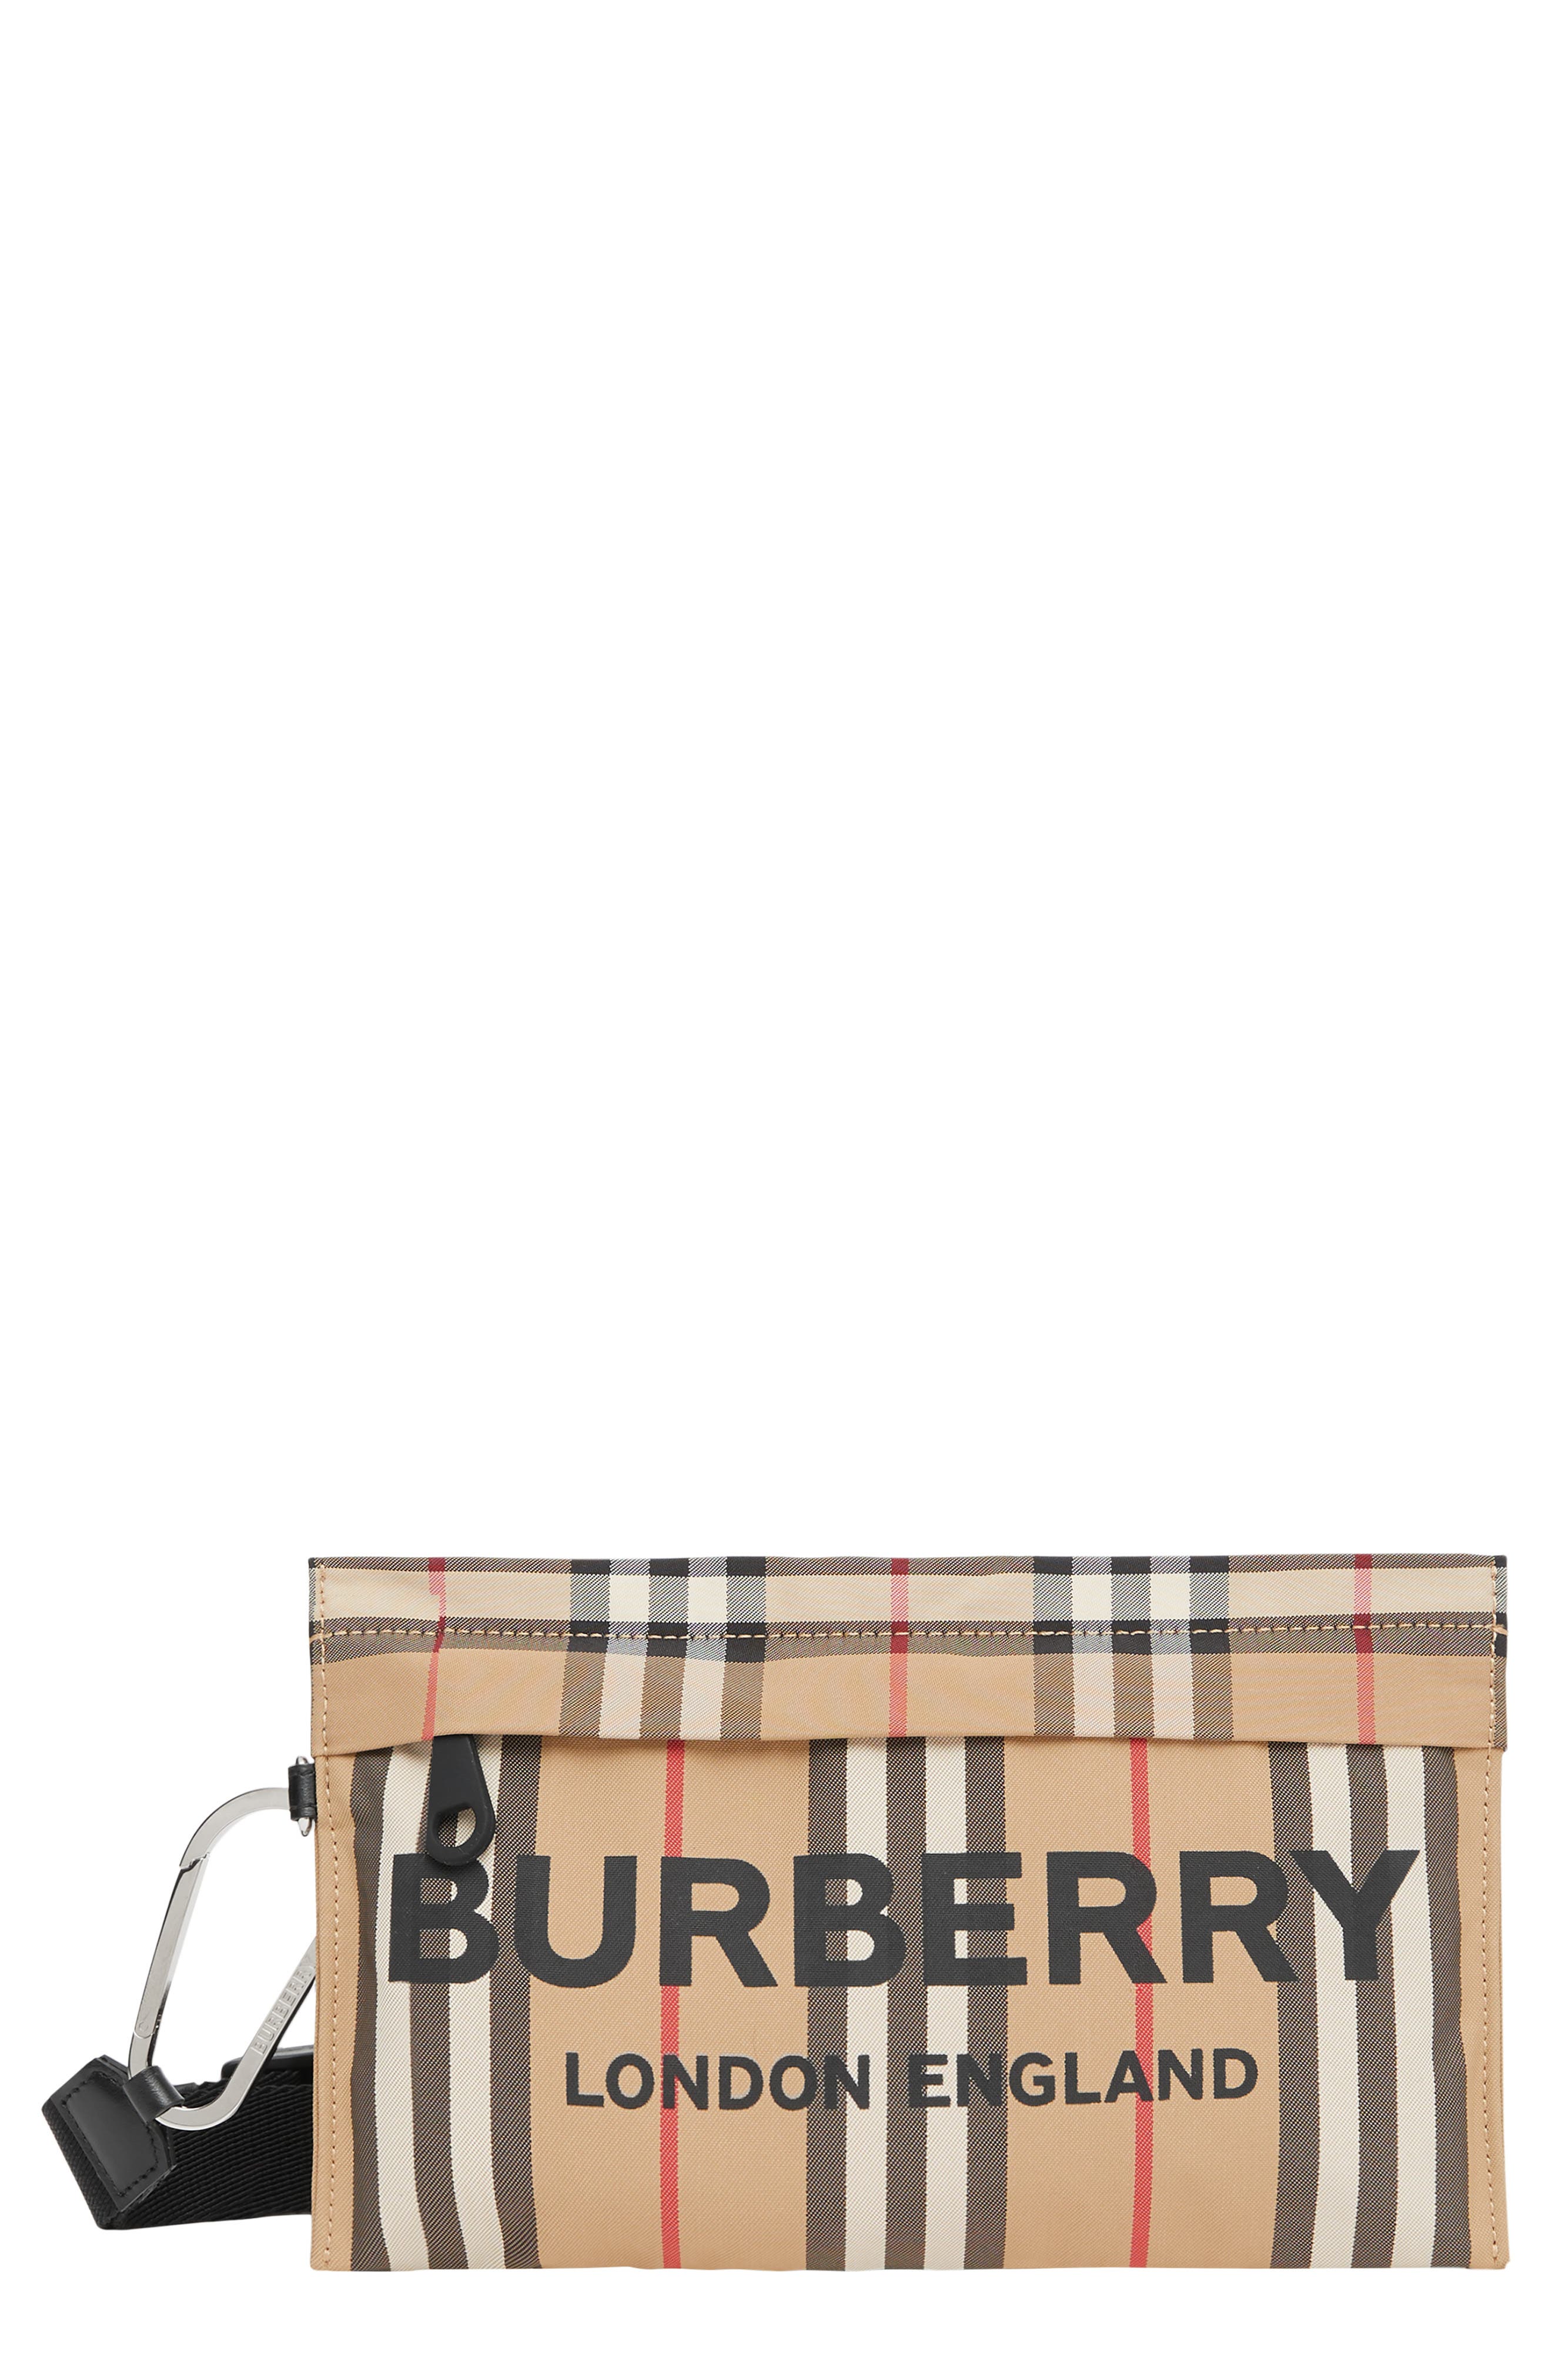 mens burberry leather watch